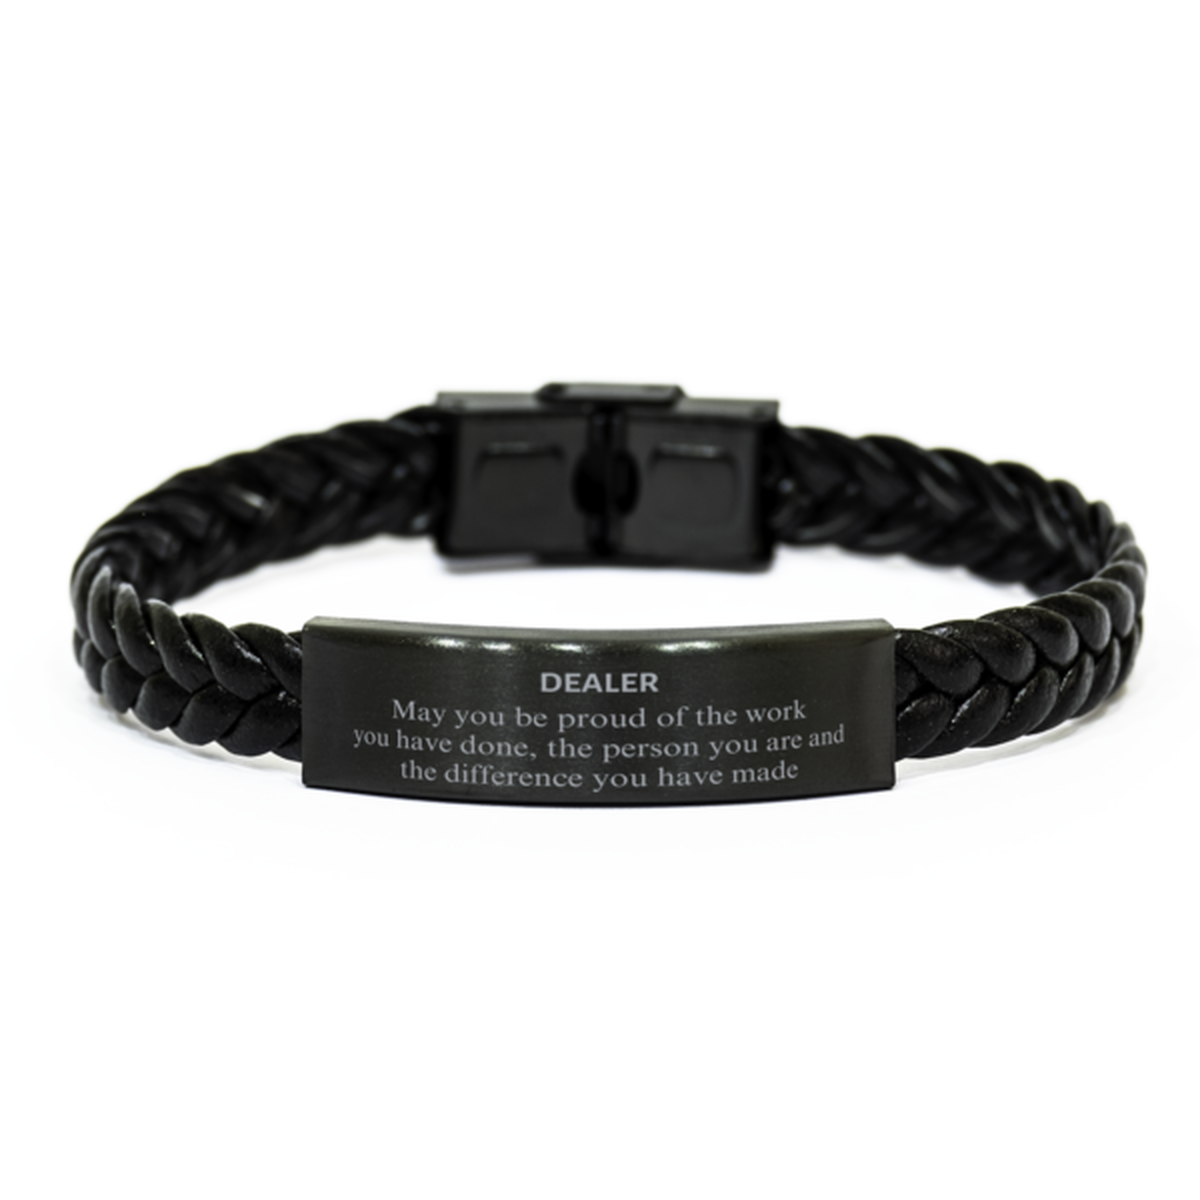 Dealer May you be proud of the work you have done, Retirement Dealer Braided Leather Bracelet for Colleague Appreciation Gifts Amazing for Dealer